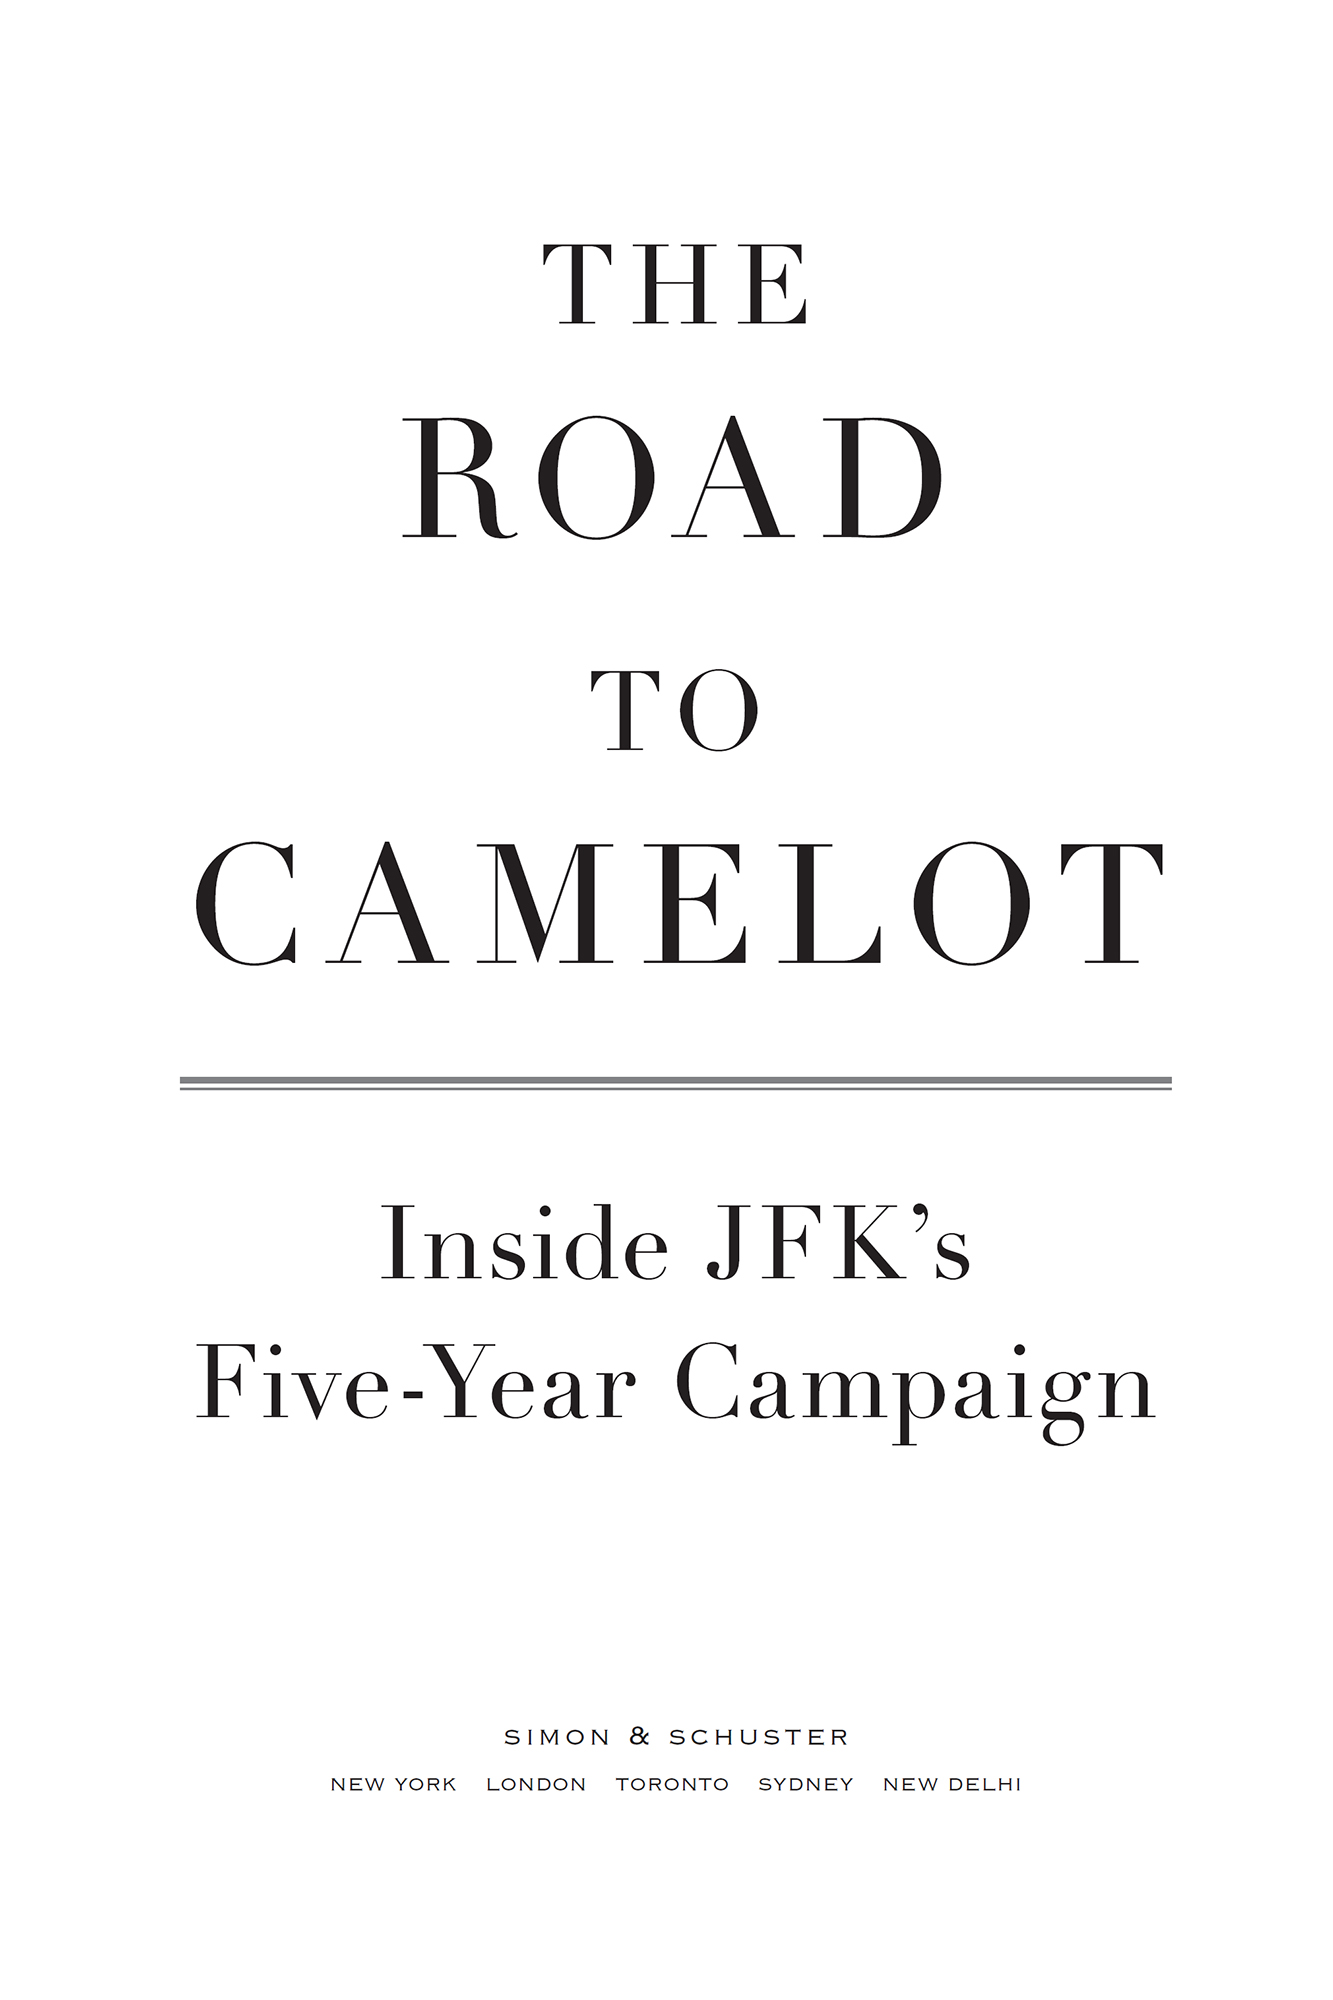 The road to Camelot inside JFKs five-year campaign - image 1